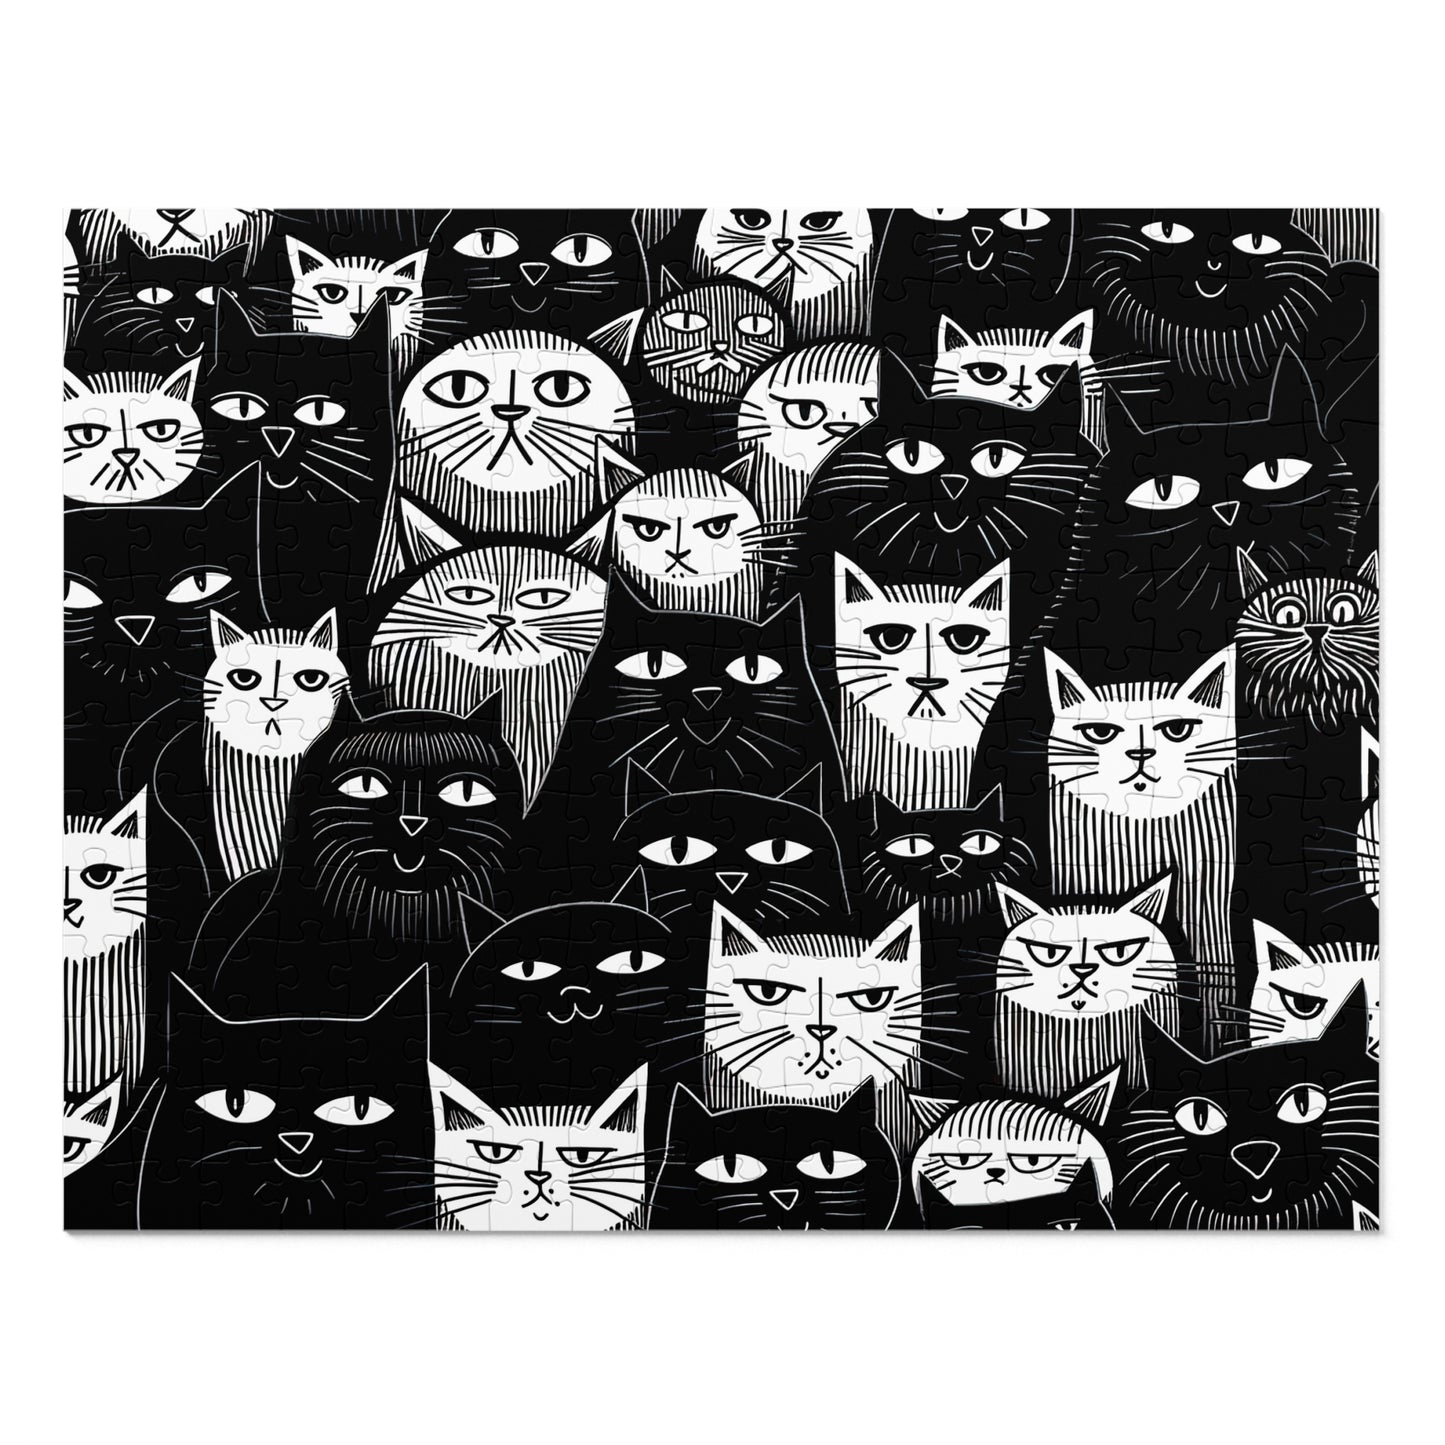 Black and White Cats • Jigsaw Puzzle